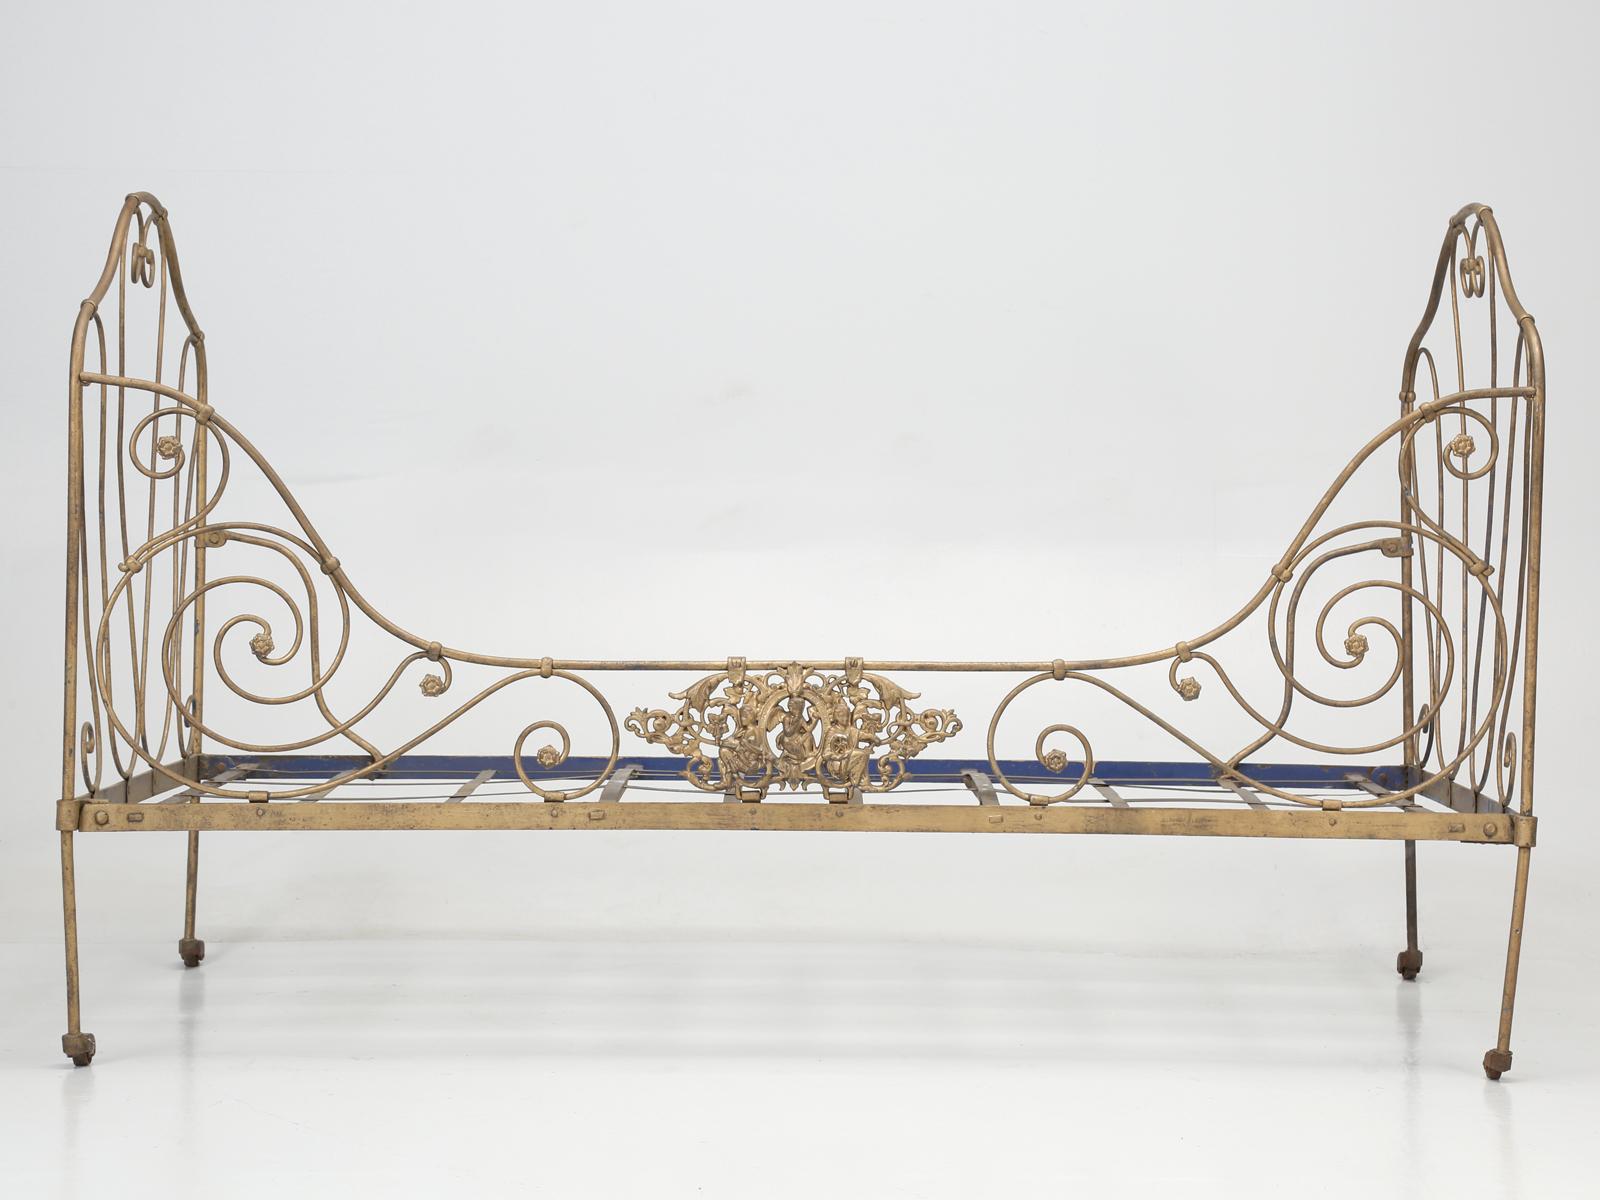 The offering here is for one antique French daybed. The paint is old, but the metal frame of the daybed is structurally sound.